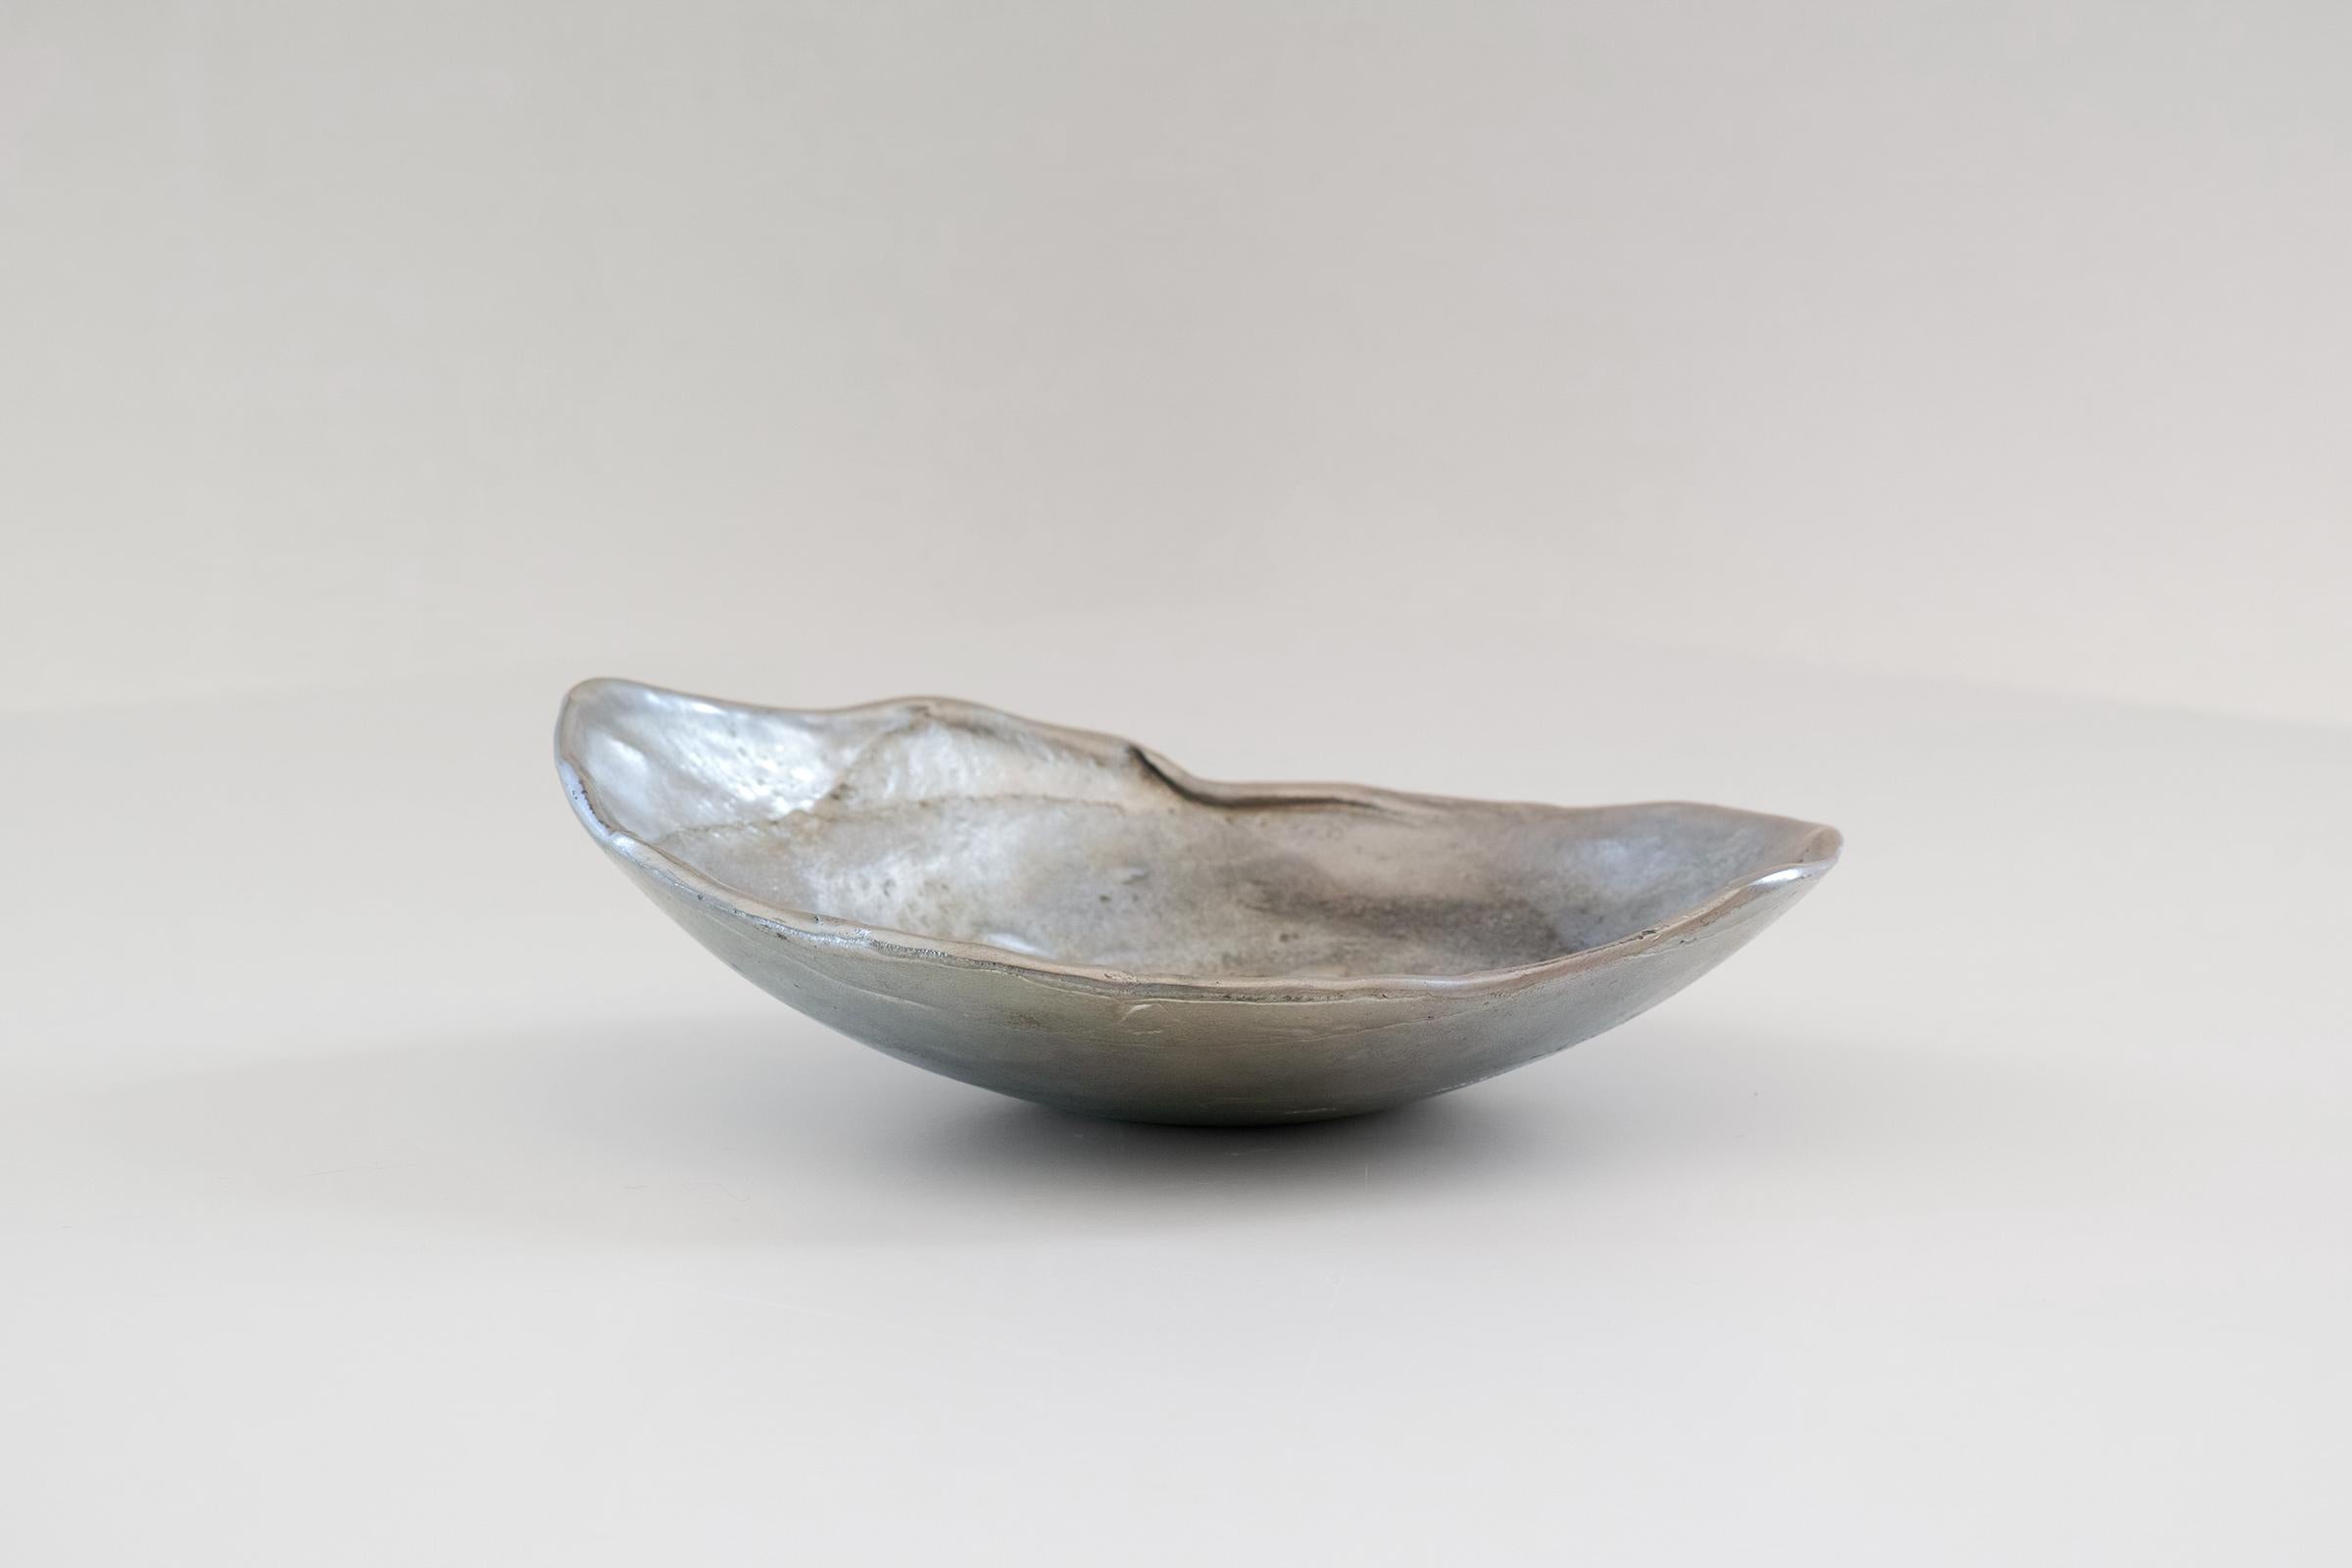 For your consideration is this rare handmade solid pewter dish by Norwegian artist, Roar Schanke, featuring a lovely organic form and surface reminiscent of an oyster or moon crater. The bottom is signed 